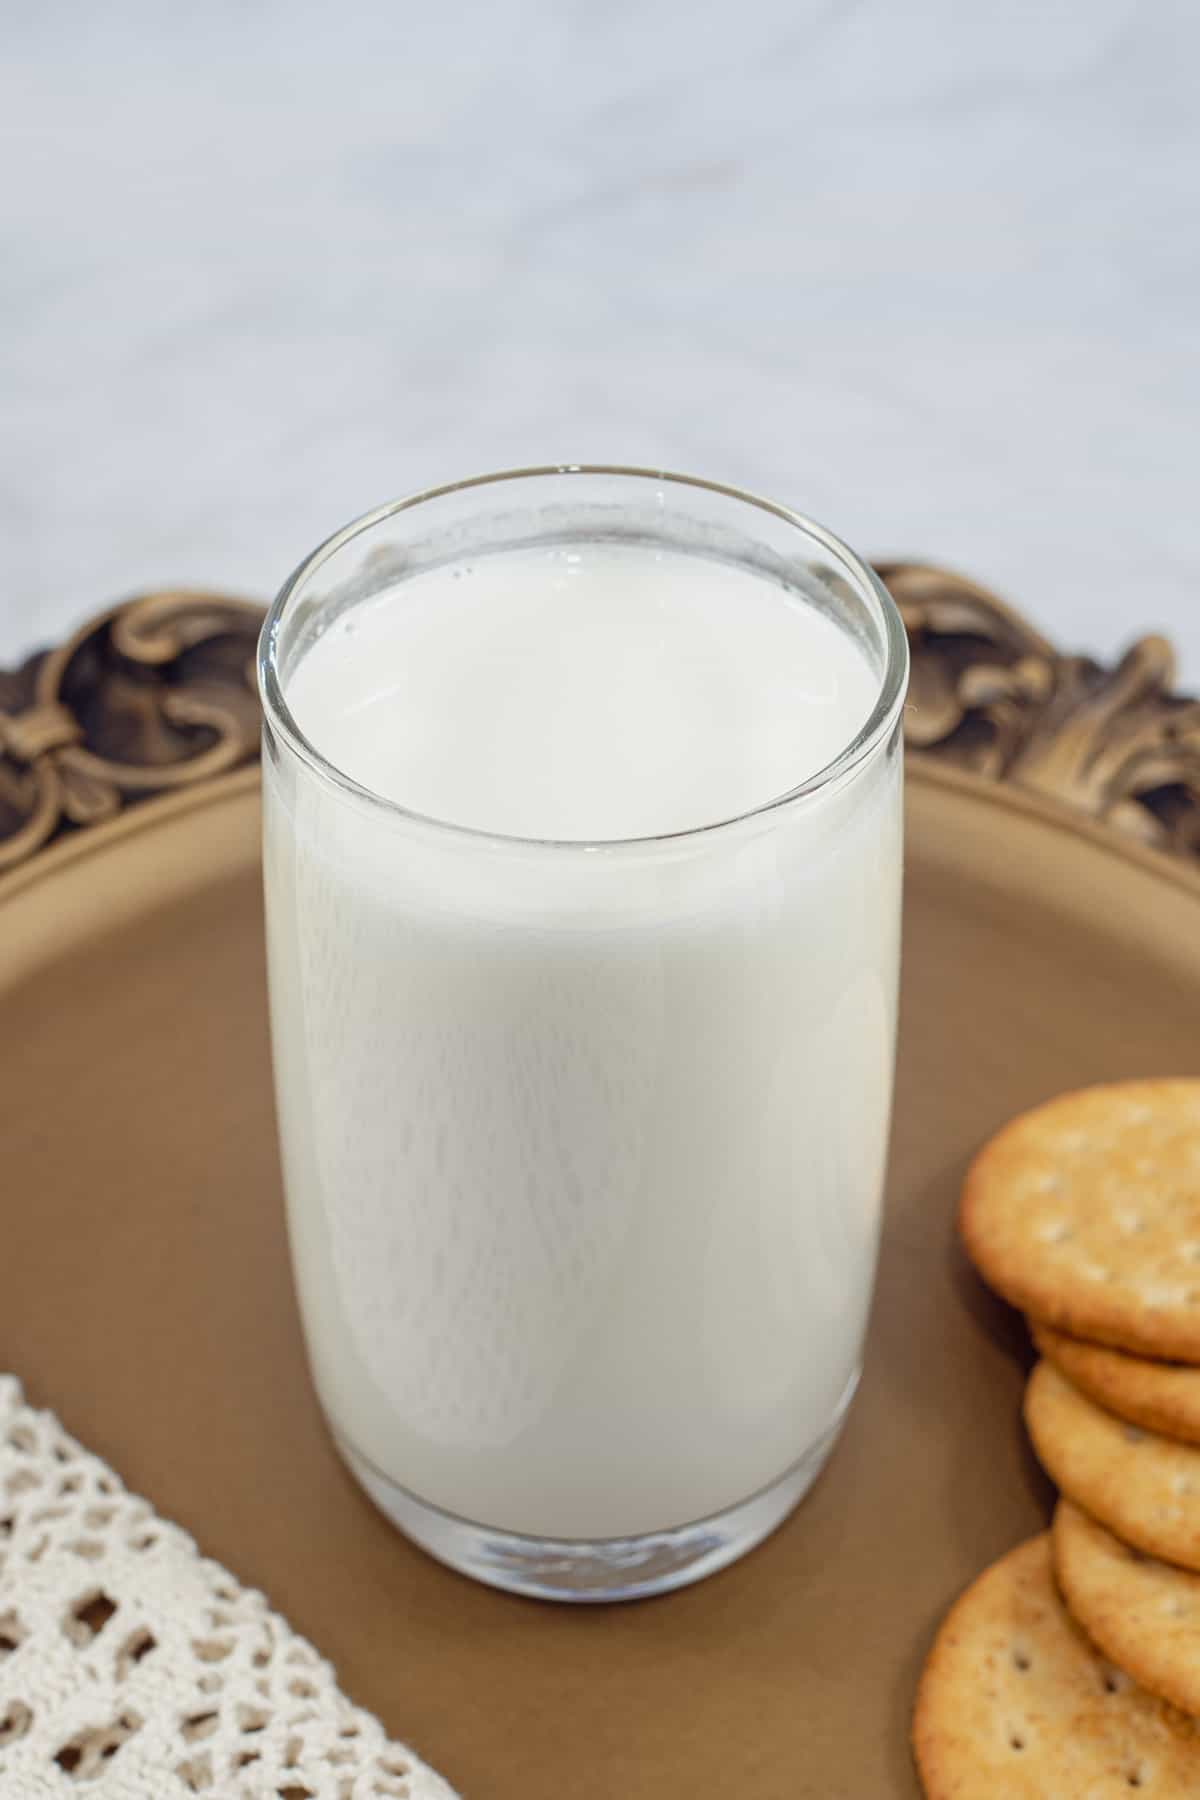 A glass of milk on a brown tray with cookies on the side.